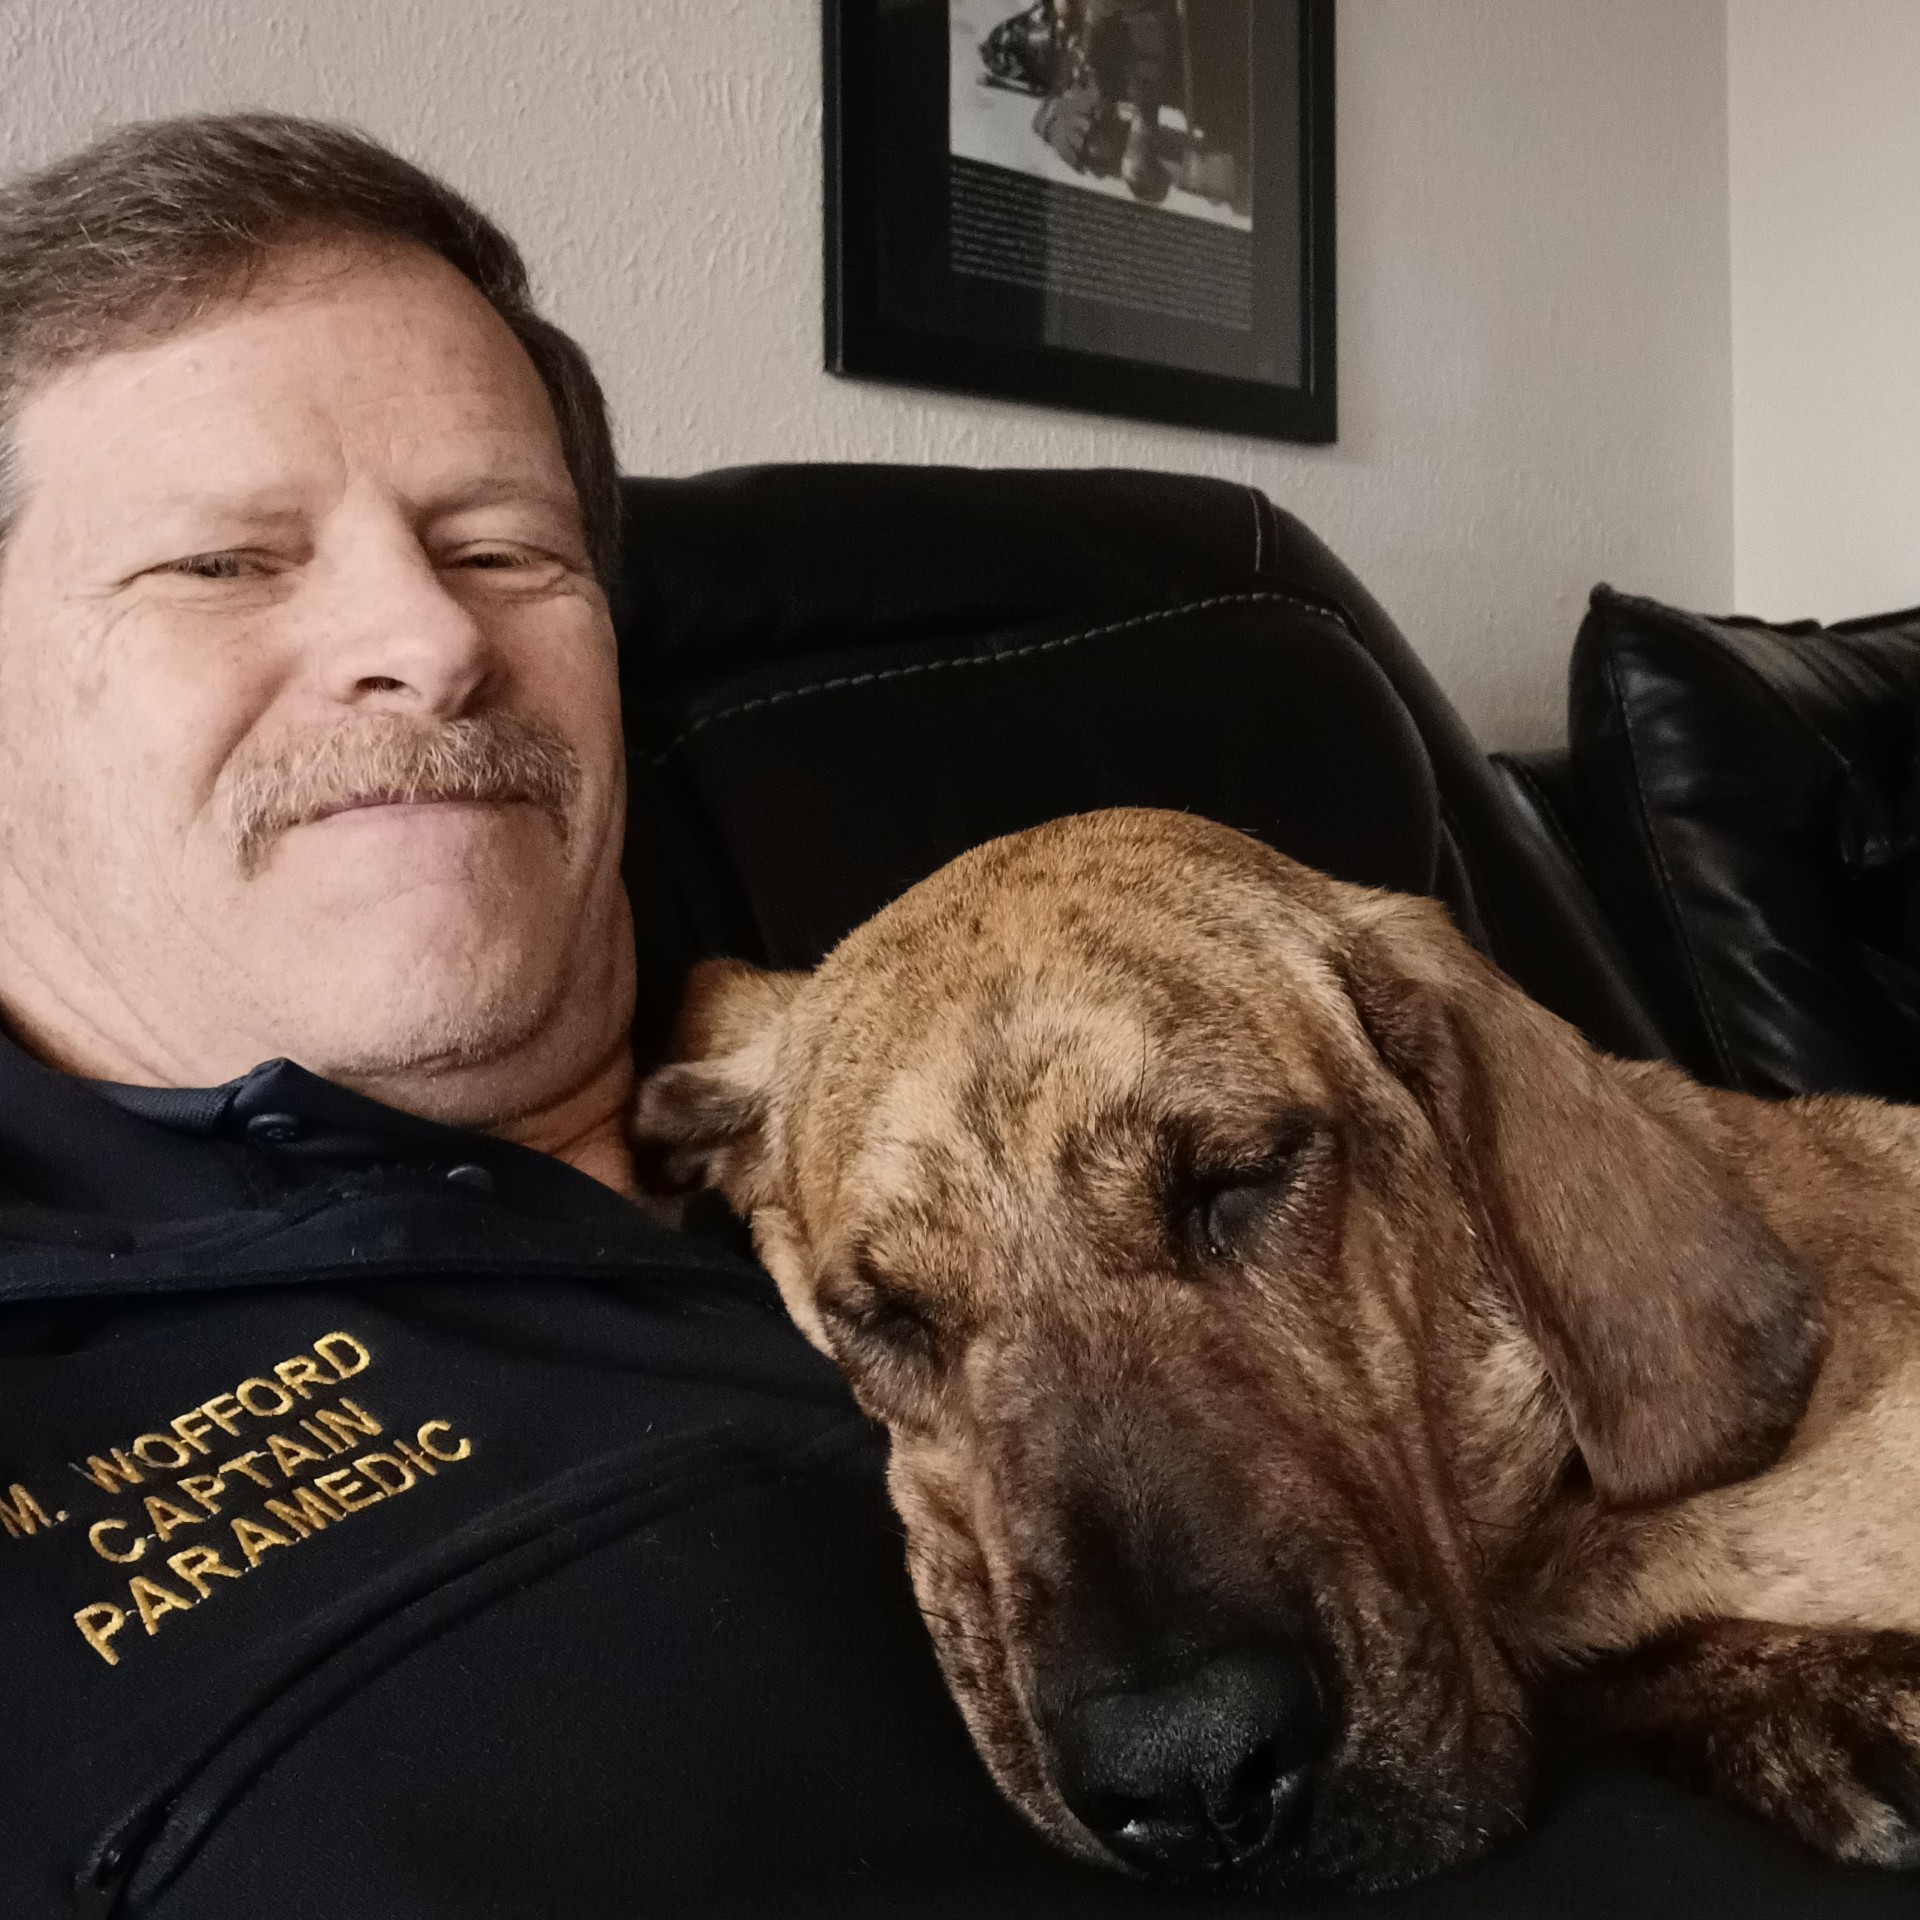 Clementine the fire dog sleeping with firefighter.